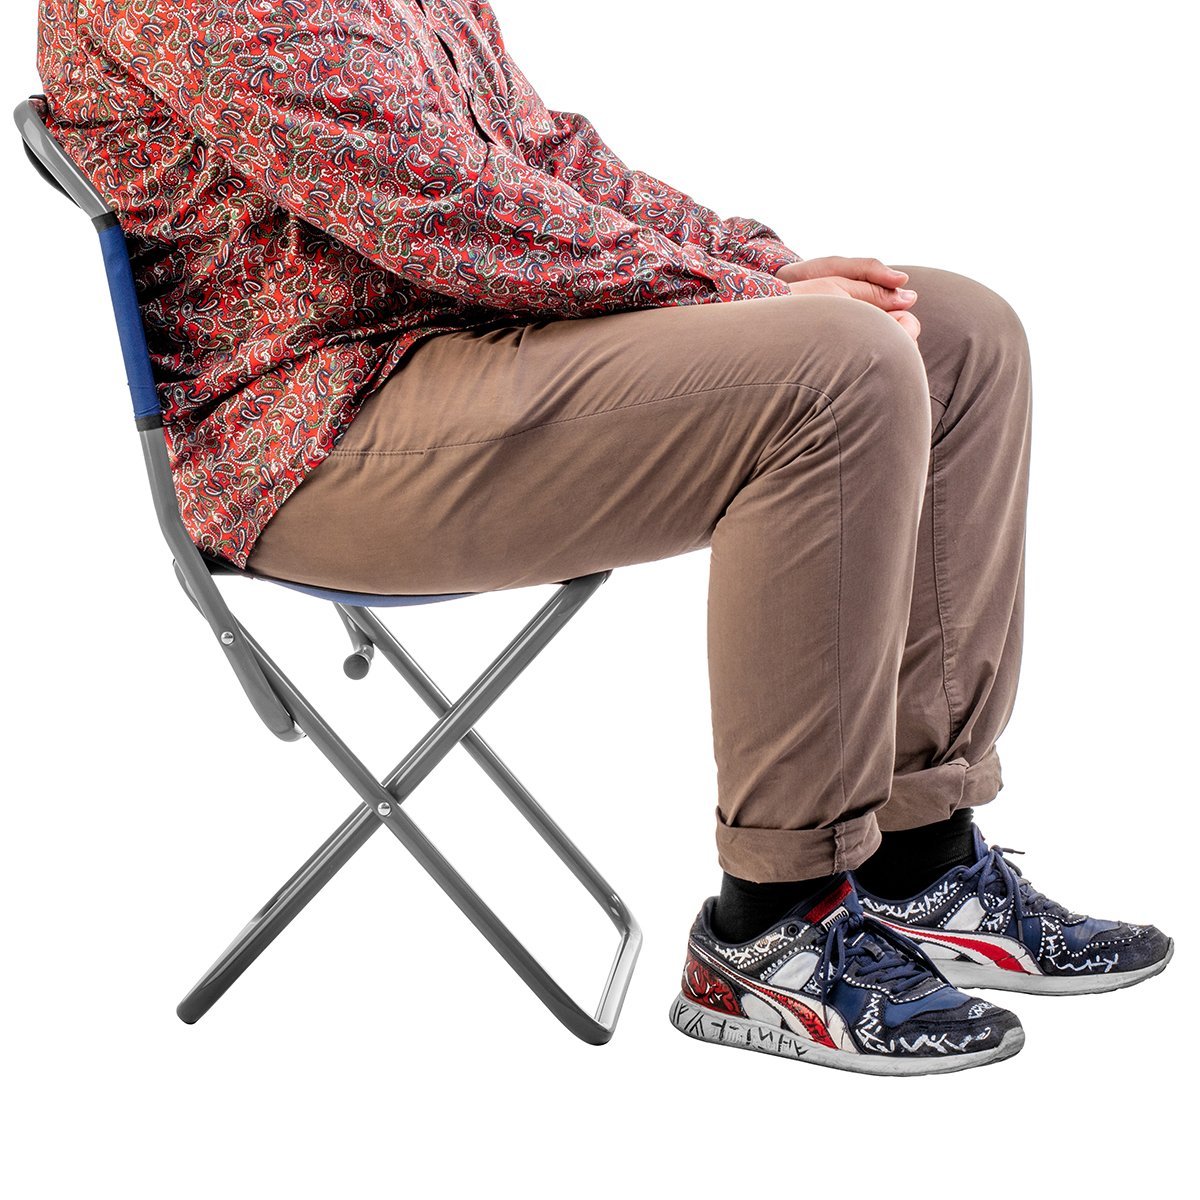 Man wearing shirt, trousers and snickers sitting on the folding camping chair with back support